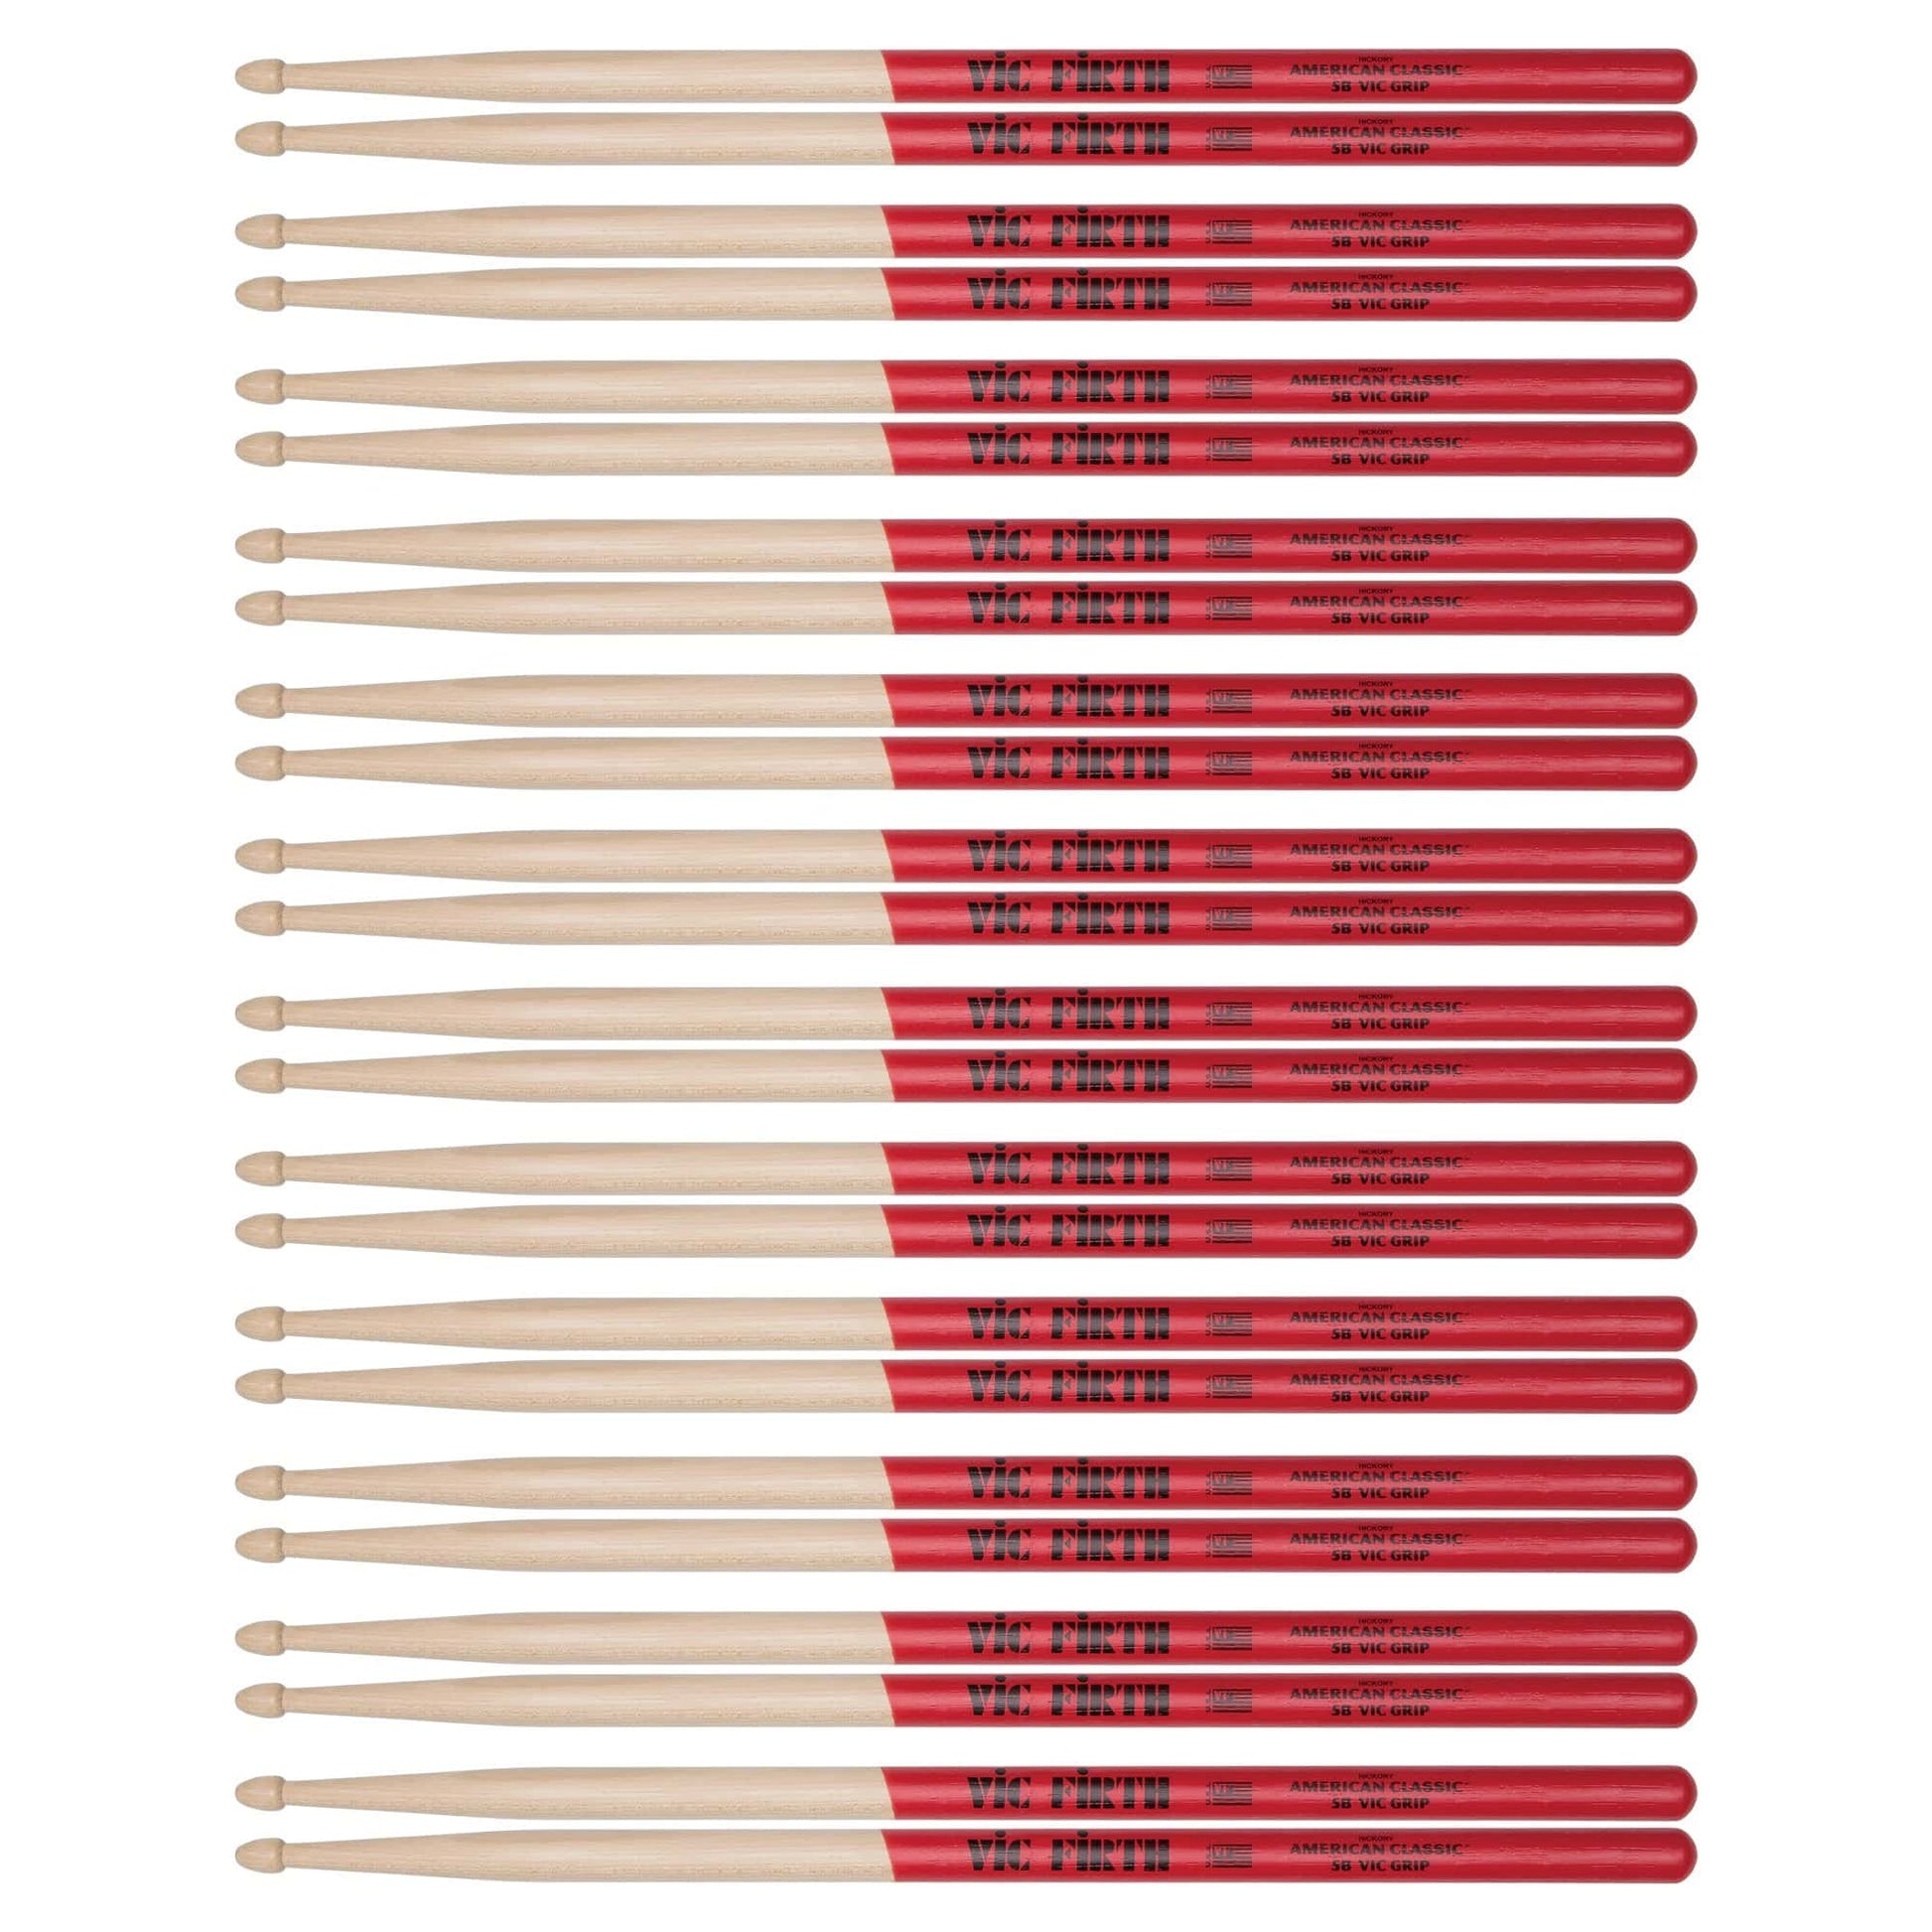 Vic Firth American Classic 5B Vic Grip Wood Tip Drum Sticks (12 Pair Bundle) Drums and Percussion / Parts and Accessories / Drum Sticks and Mallets